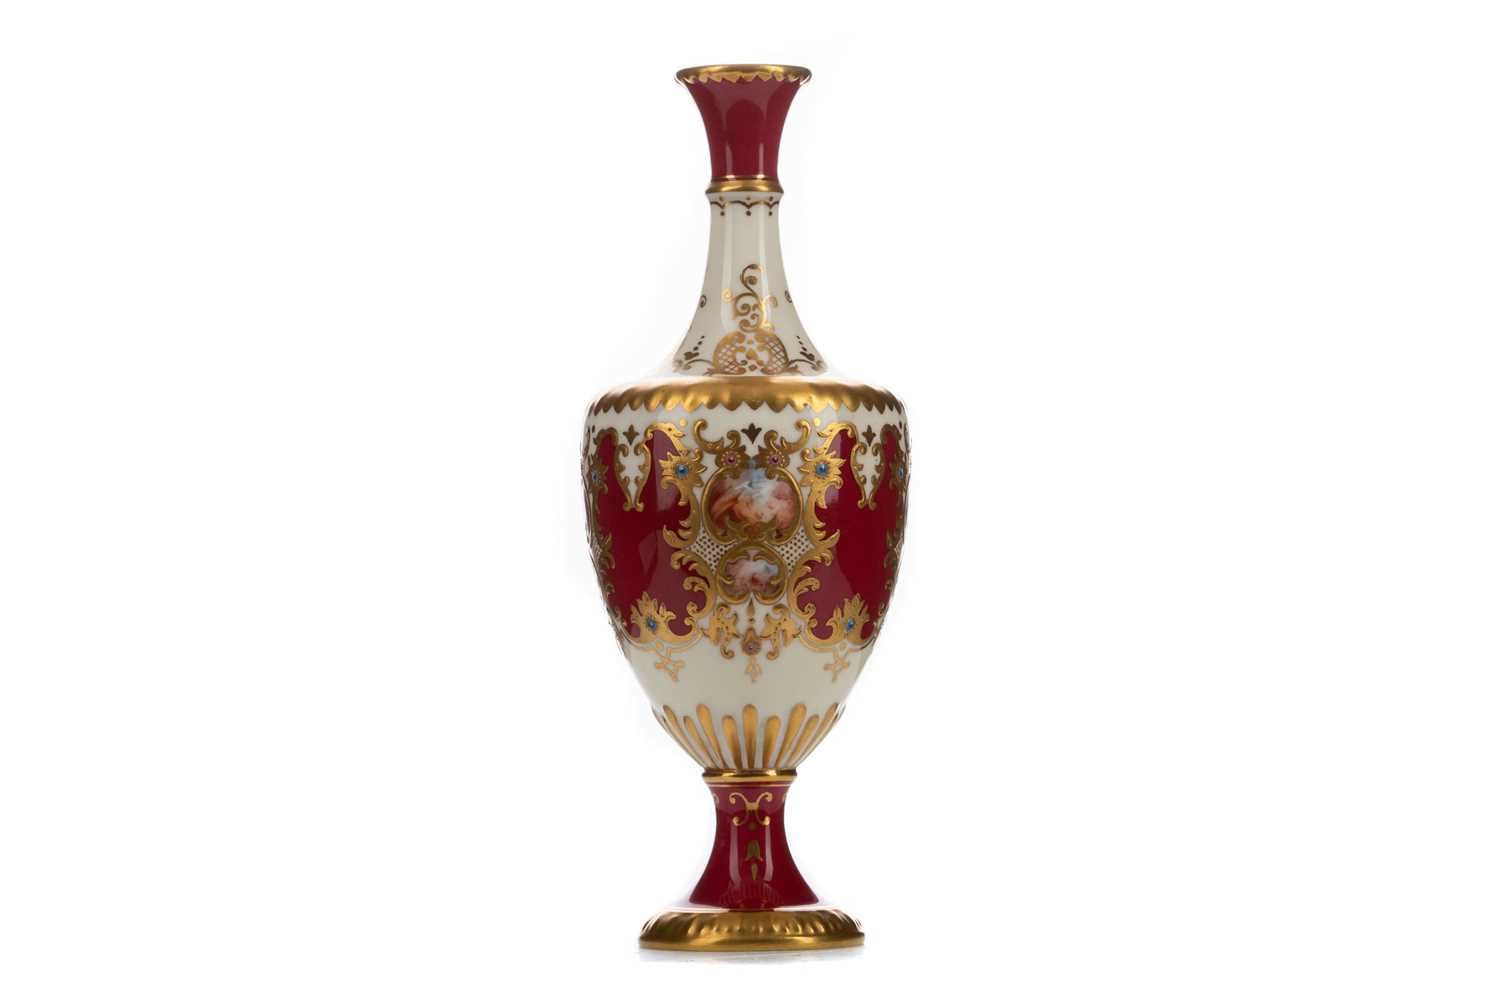 A SMALL LATE 19TH CENTURY COPELAND URN FORM BUD VASE